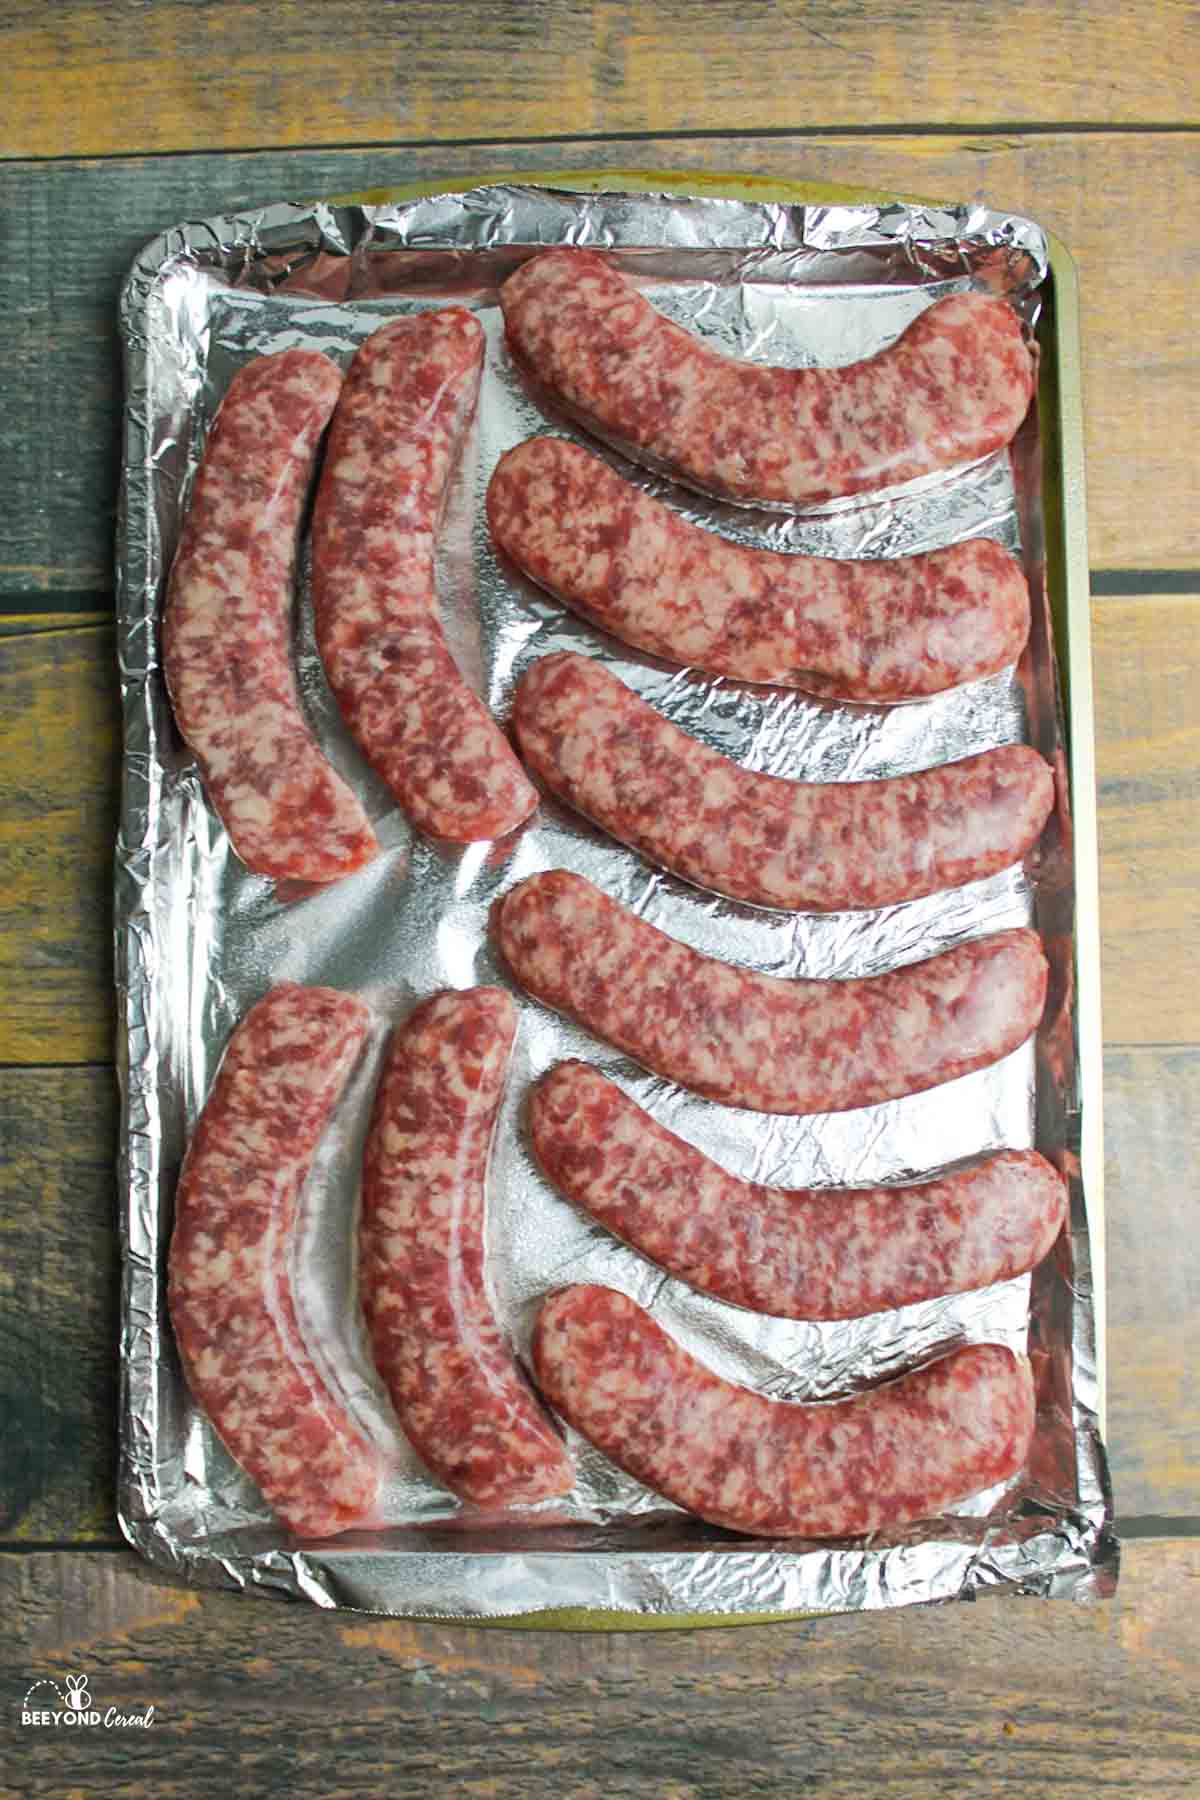 uncooked brats layed on a baking sheet ready to be cooked